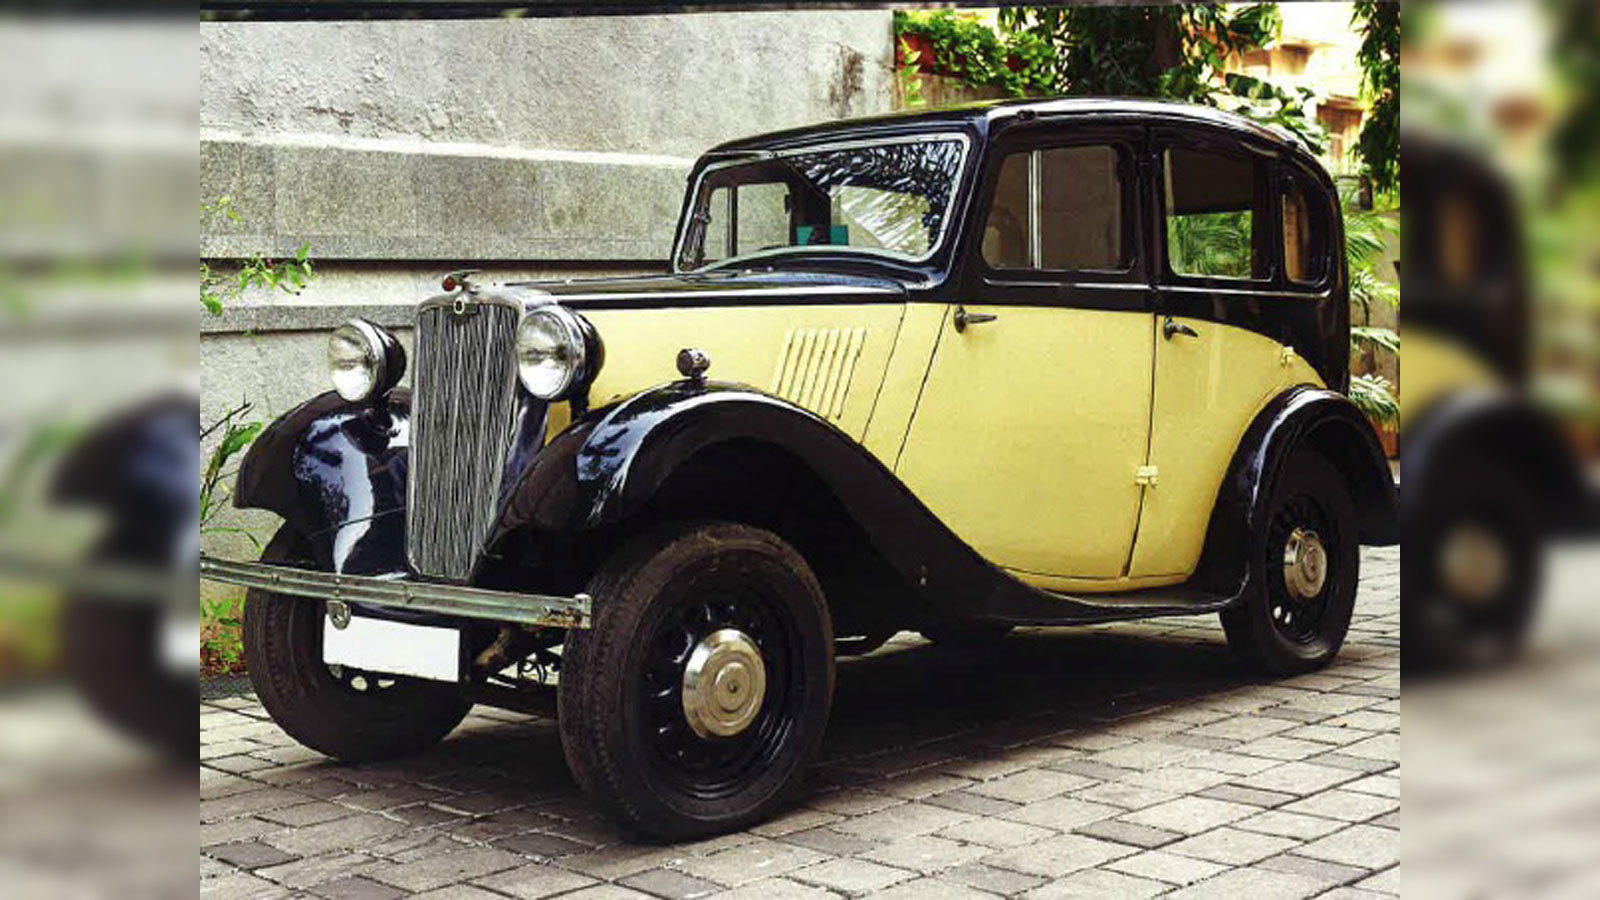 10 vintage cars worth Rs 2.5 crore up for auction - The Economic Times